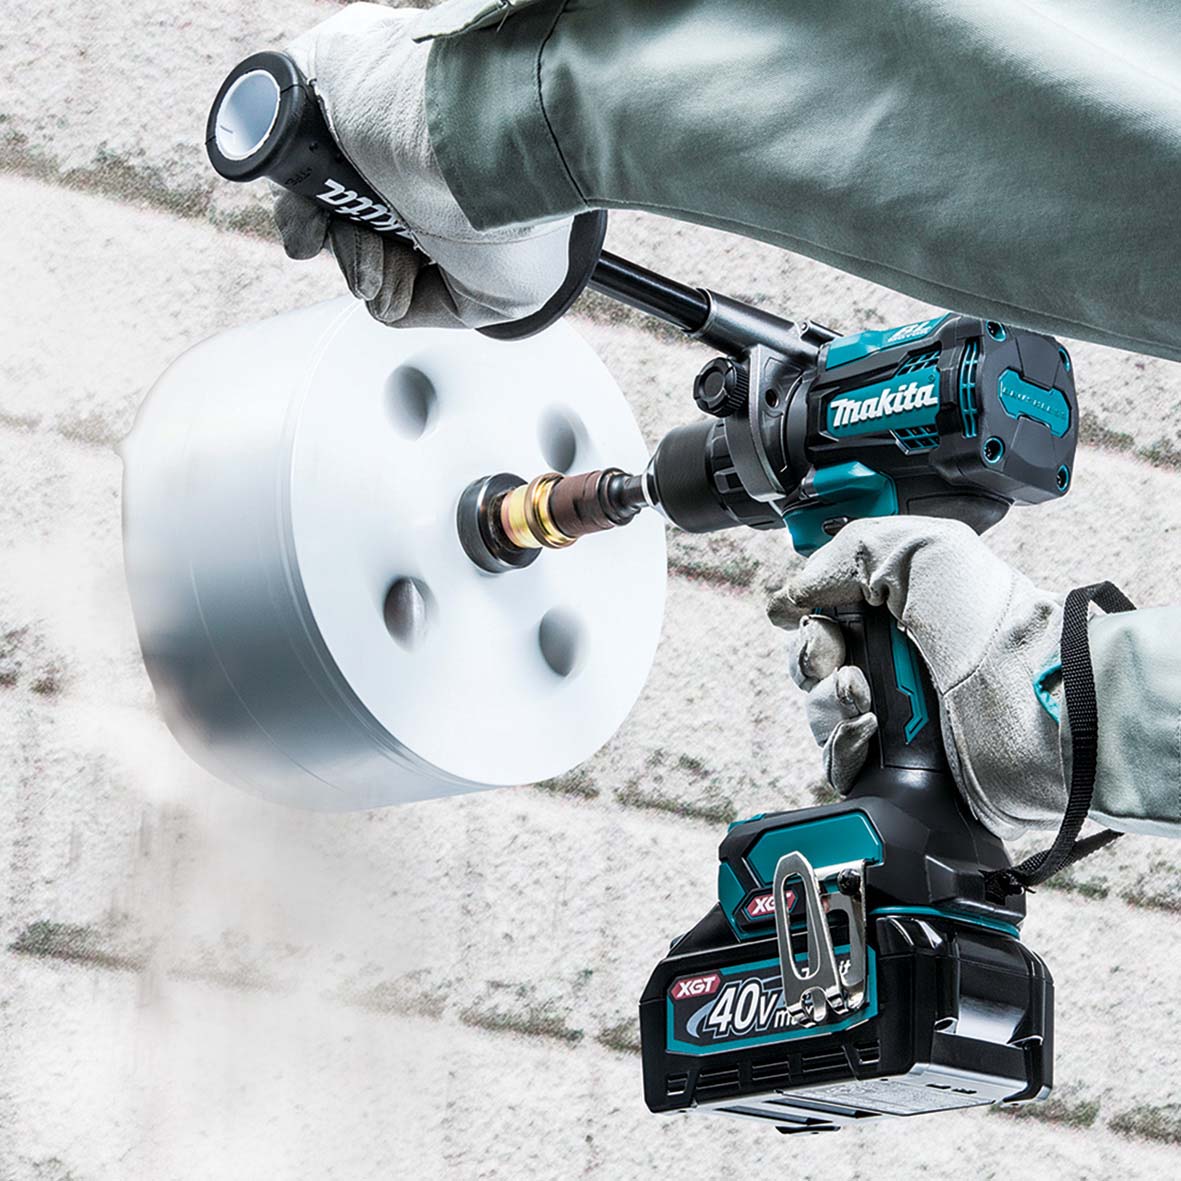 40V Brushless Driver Drill Bare (Tool Only) DF001GZ by Makita